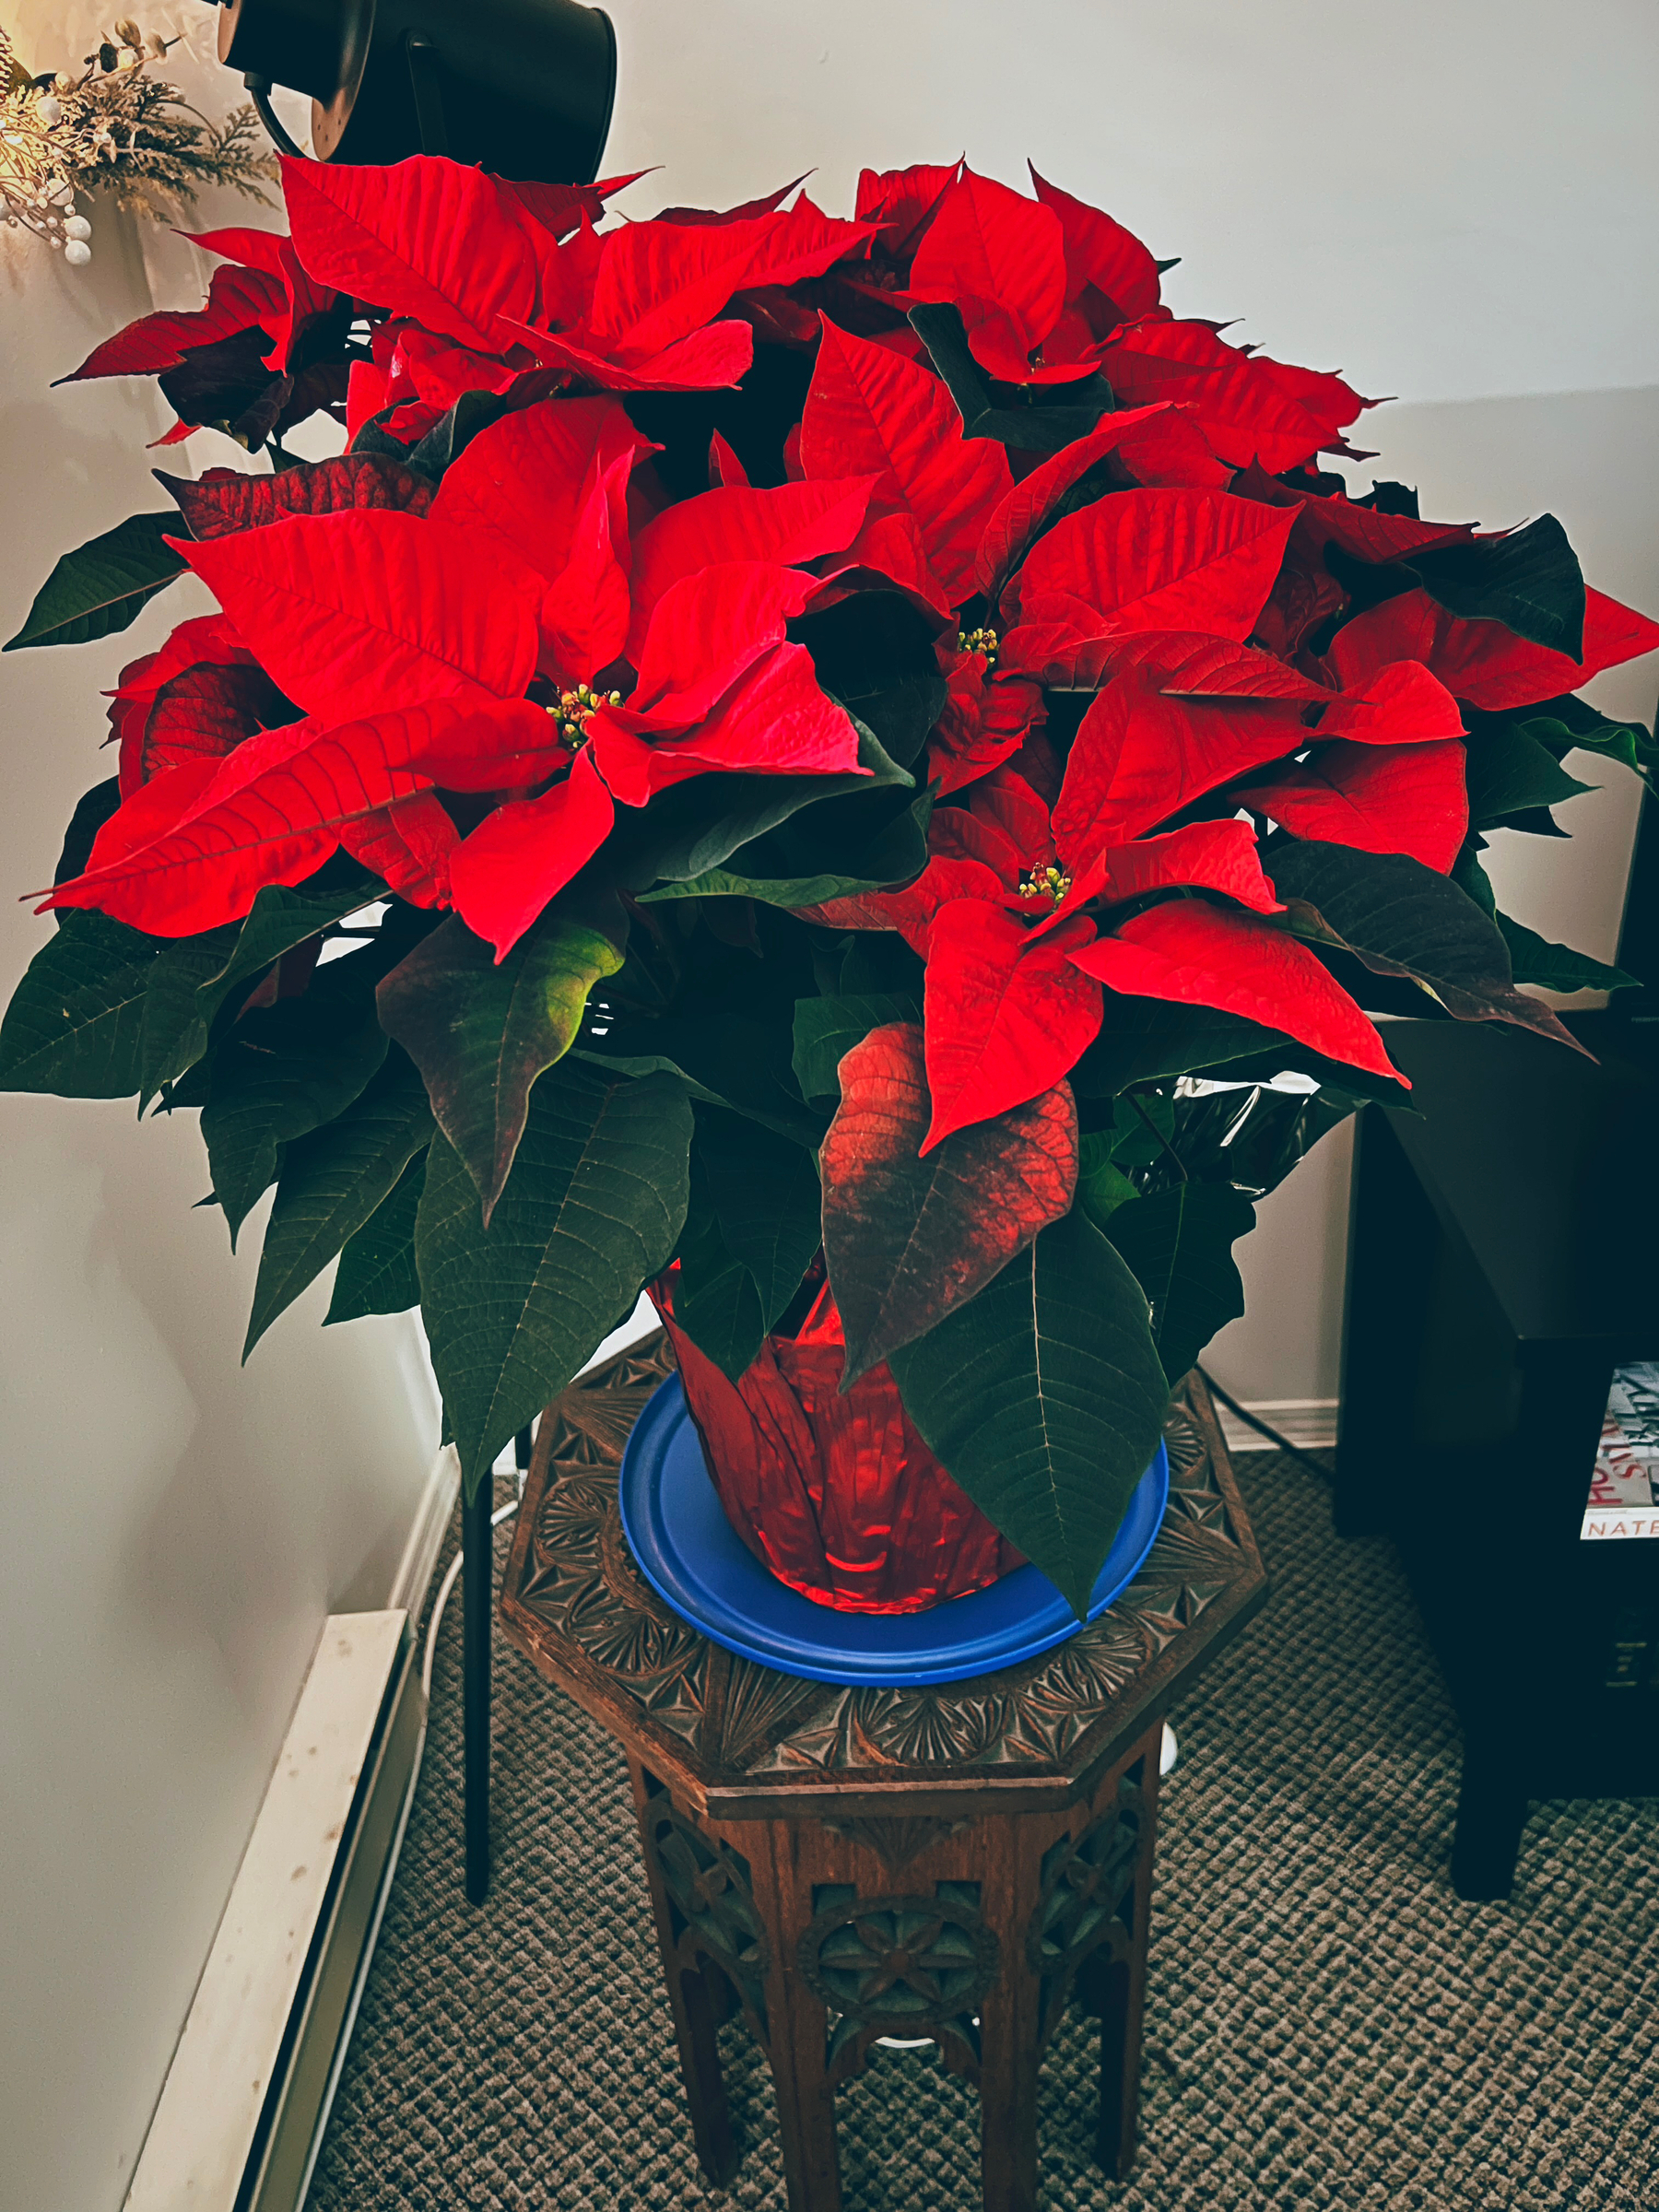 A photo of the biggest poinsettia I’ve ever seen.